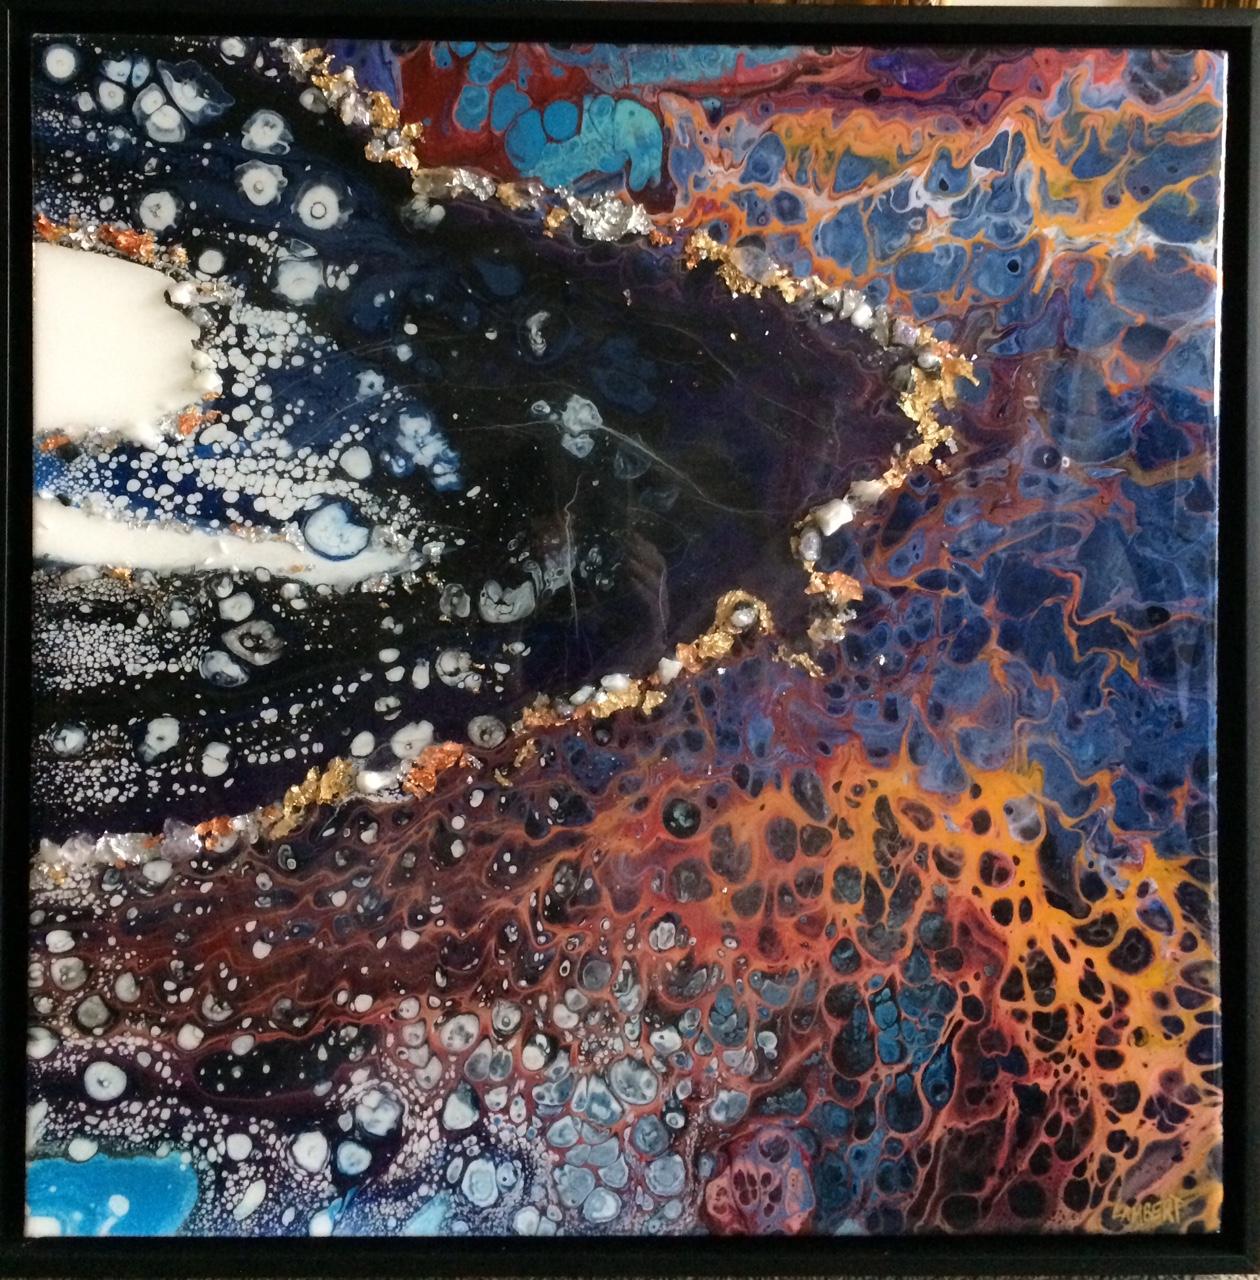 Gravitational Effect, original 24x24 abstract expressionist epoxy resin painting - Mixed Media Art by Tina Louise Lambert